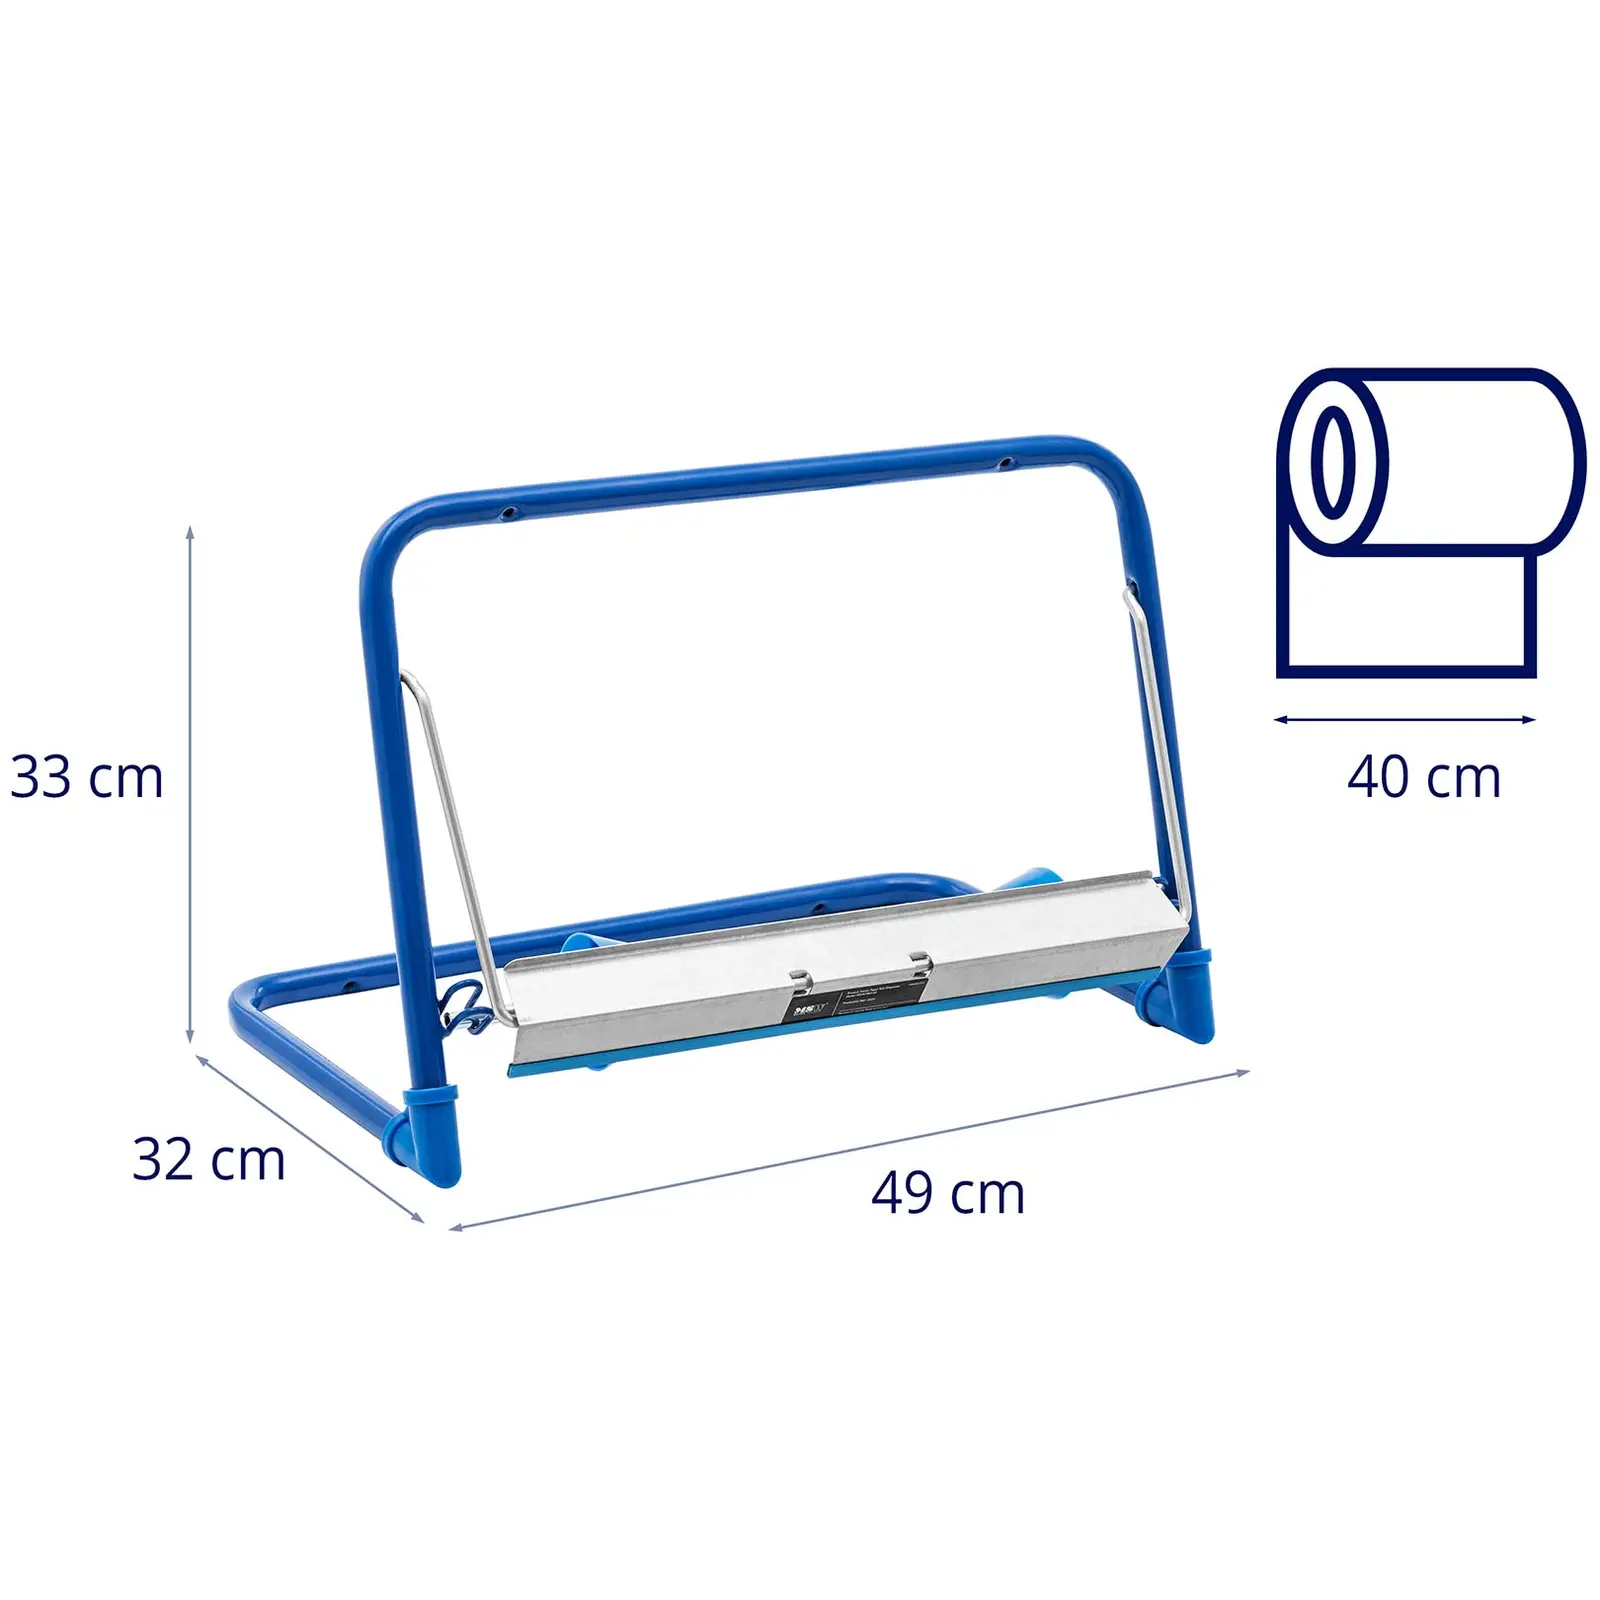 Paper towel holder - wall mounted - up to 5 kg - Ø 500 mm - plastic / steel